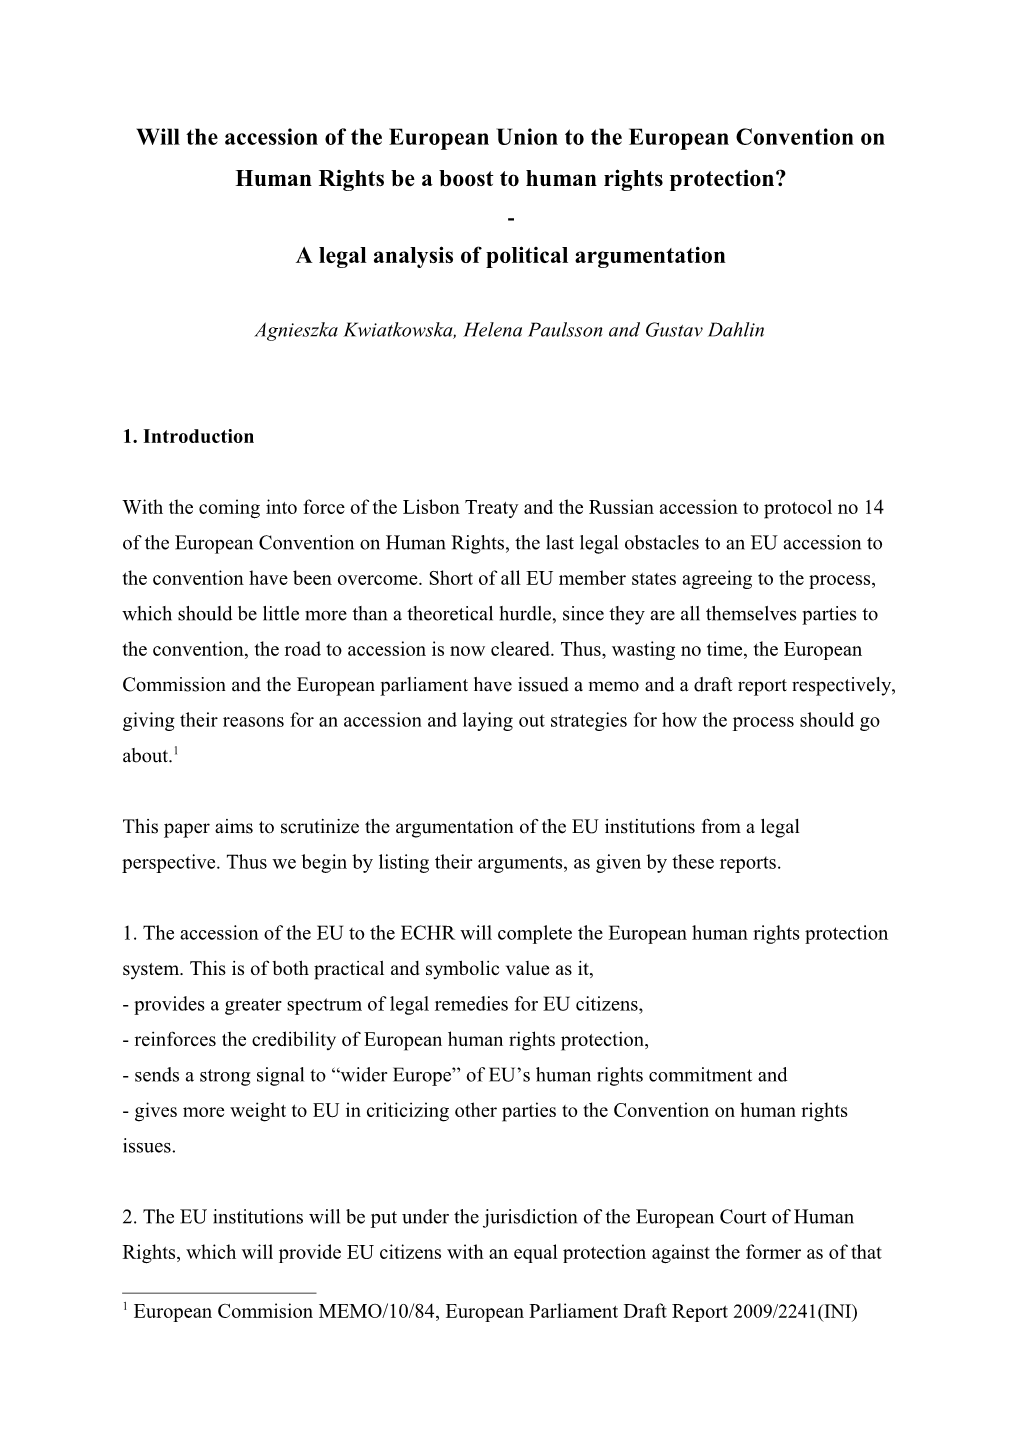 Is the Accession of the European Union to the European Convention on Human Rights a Boost